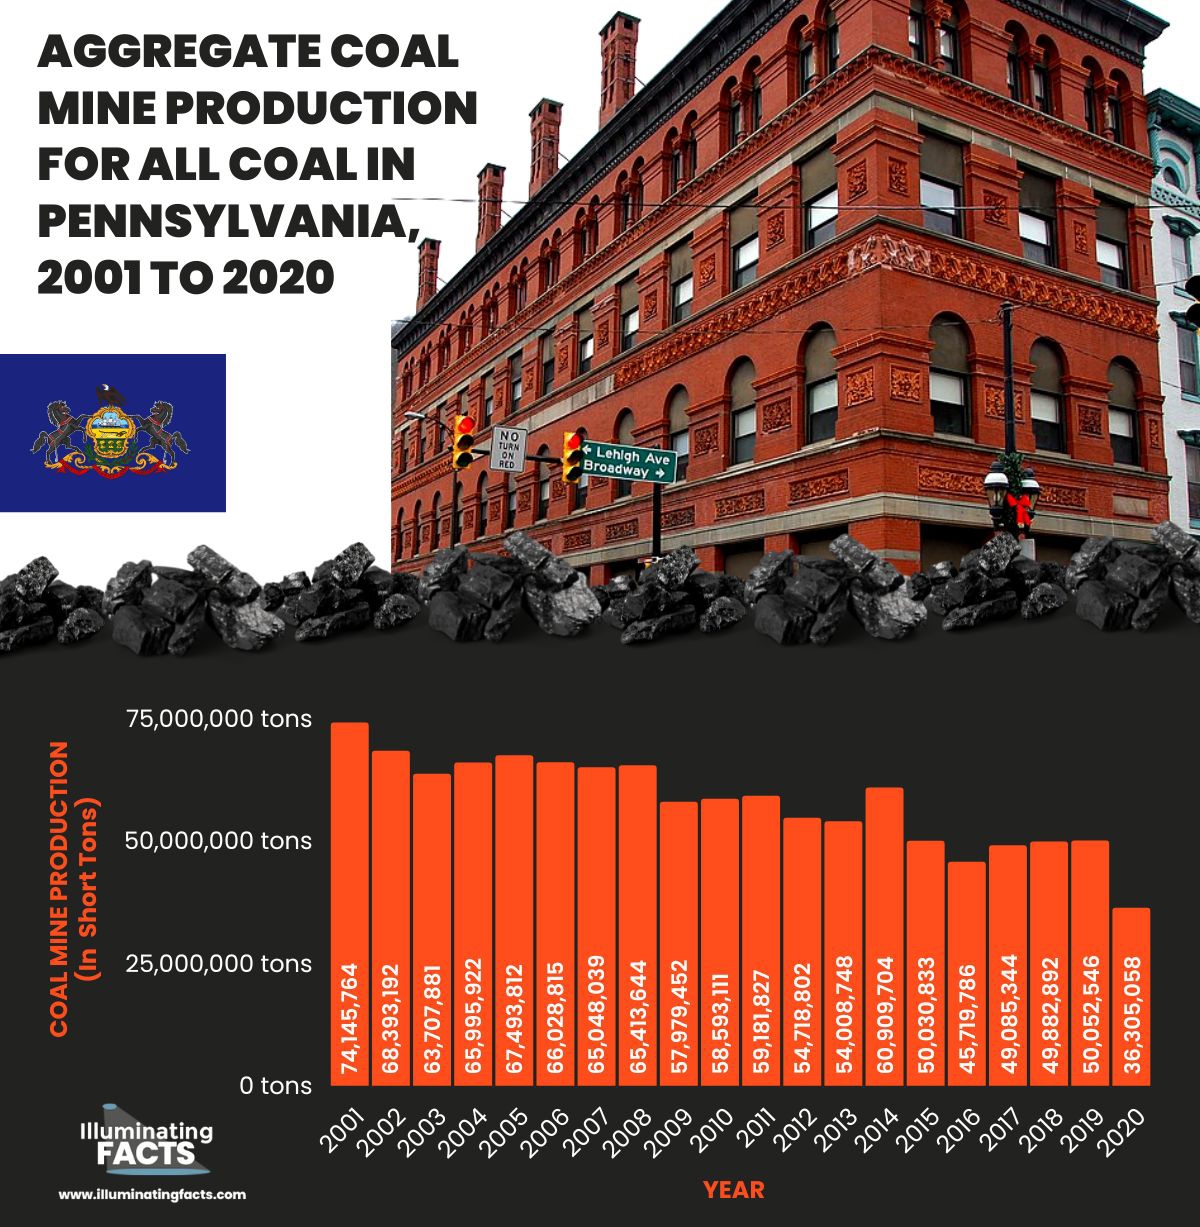 Aggregate coal mine production for all coal in Pennsylvania, 2001 to 2020